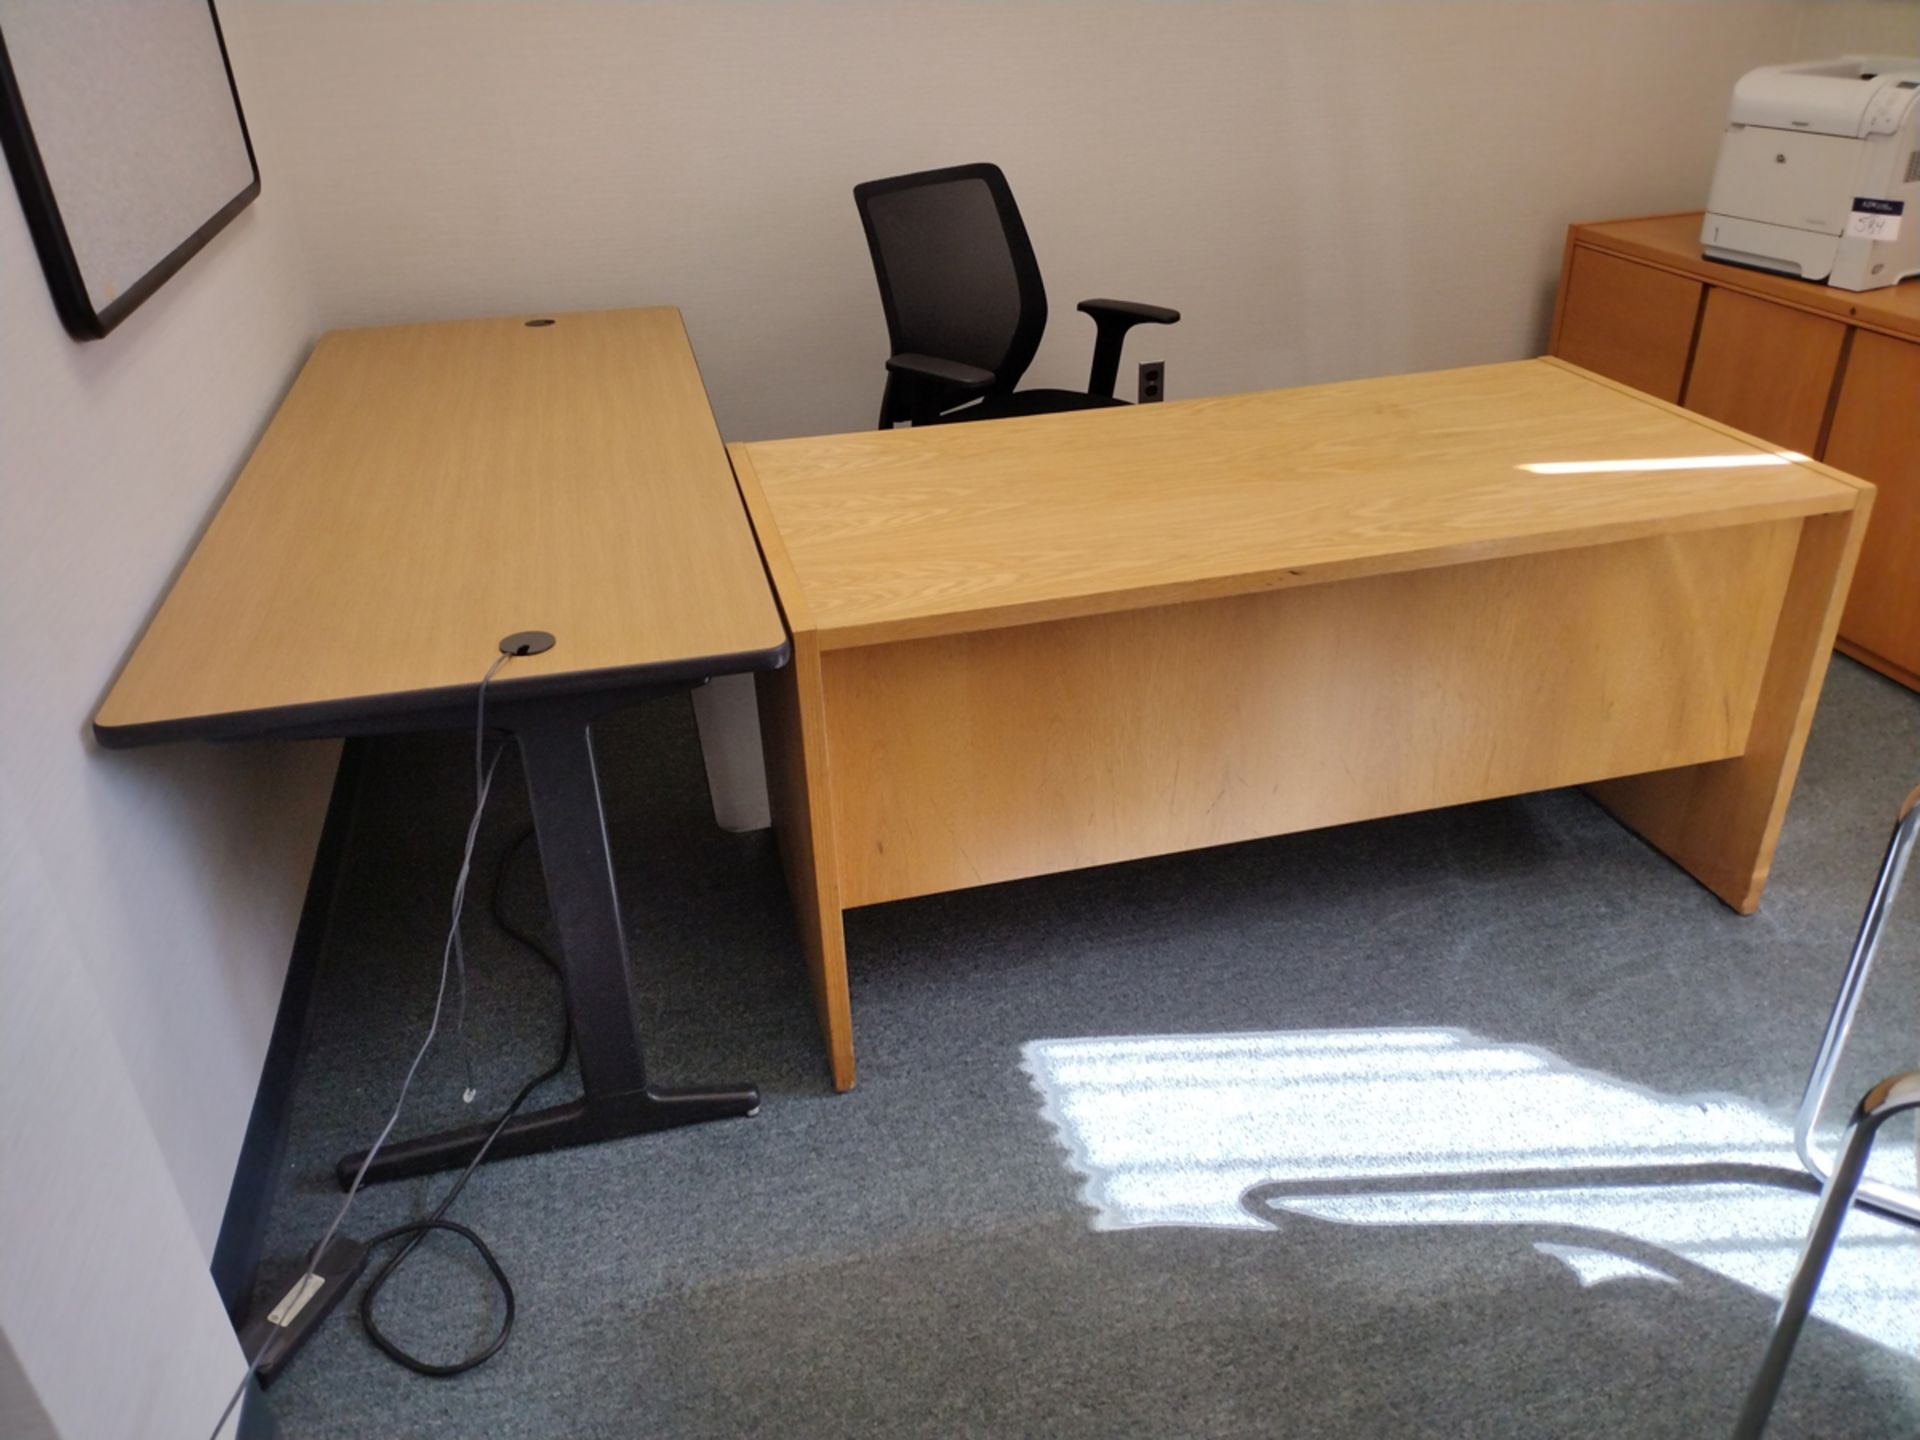 Group of Office Furniture Throughout Rooms - Image 7 of 14